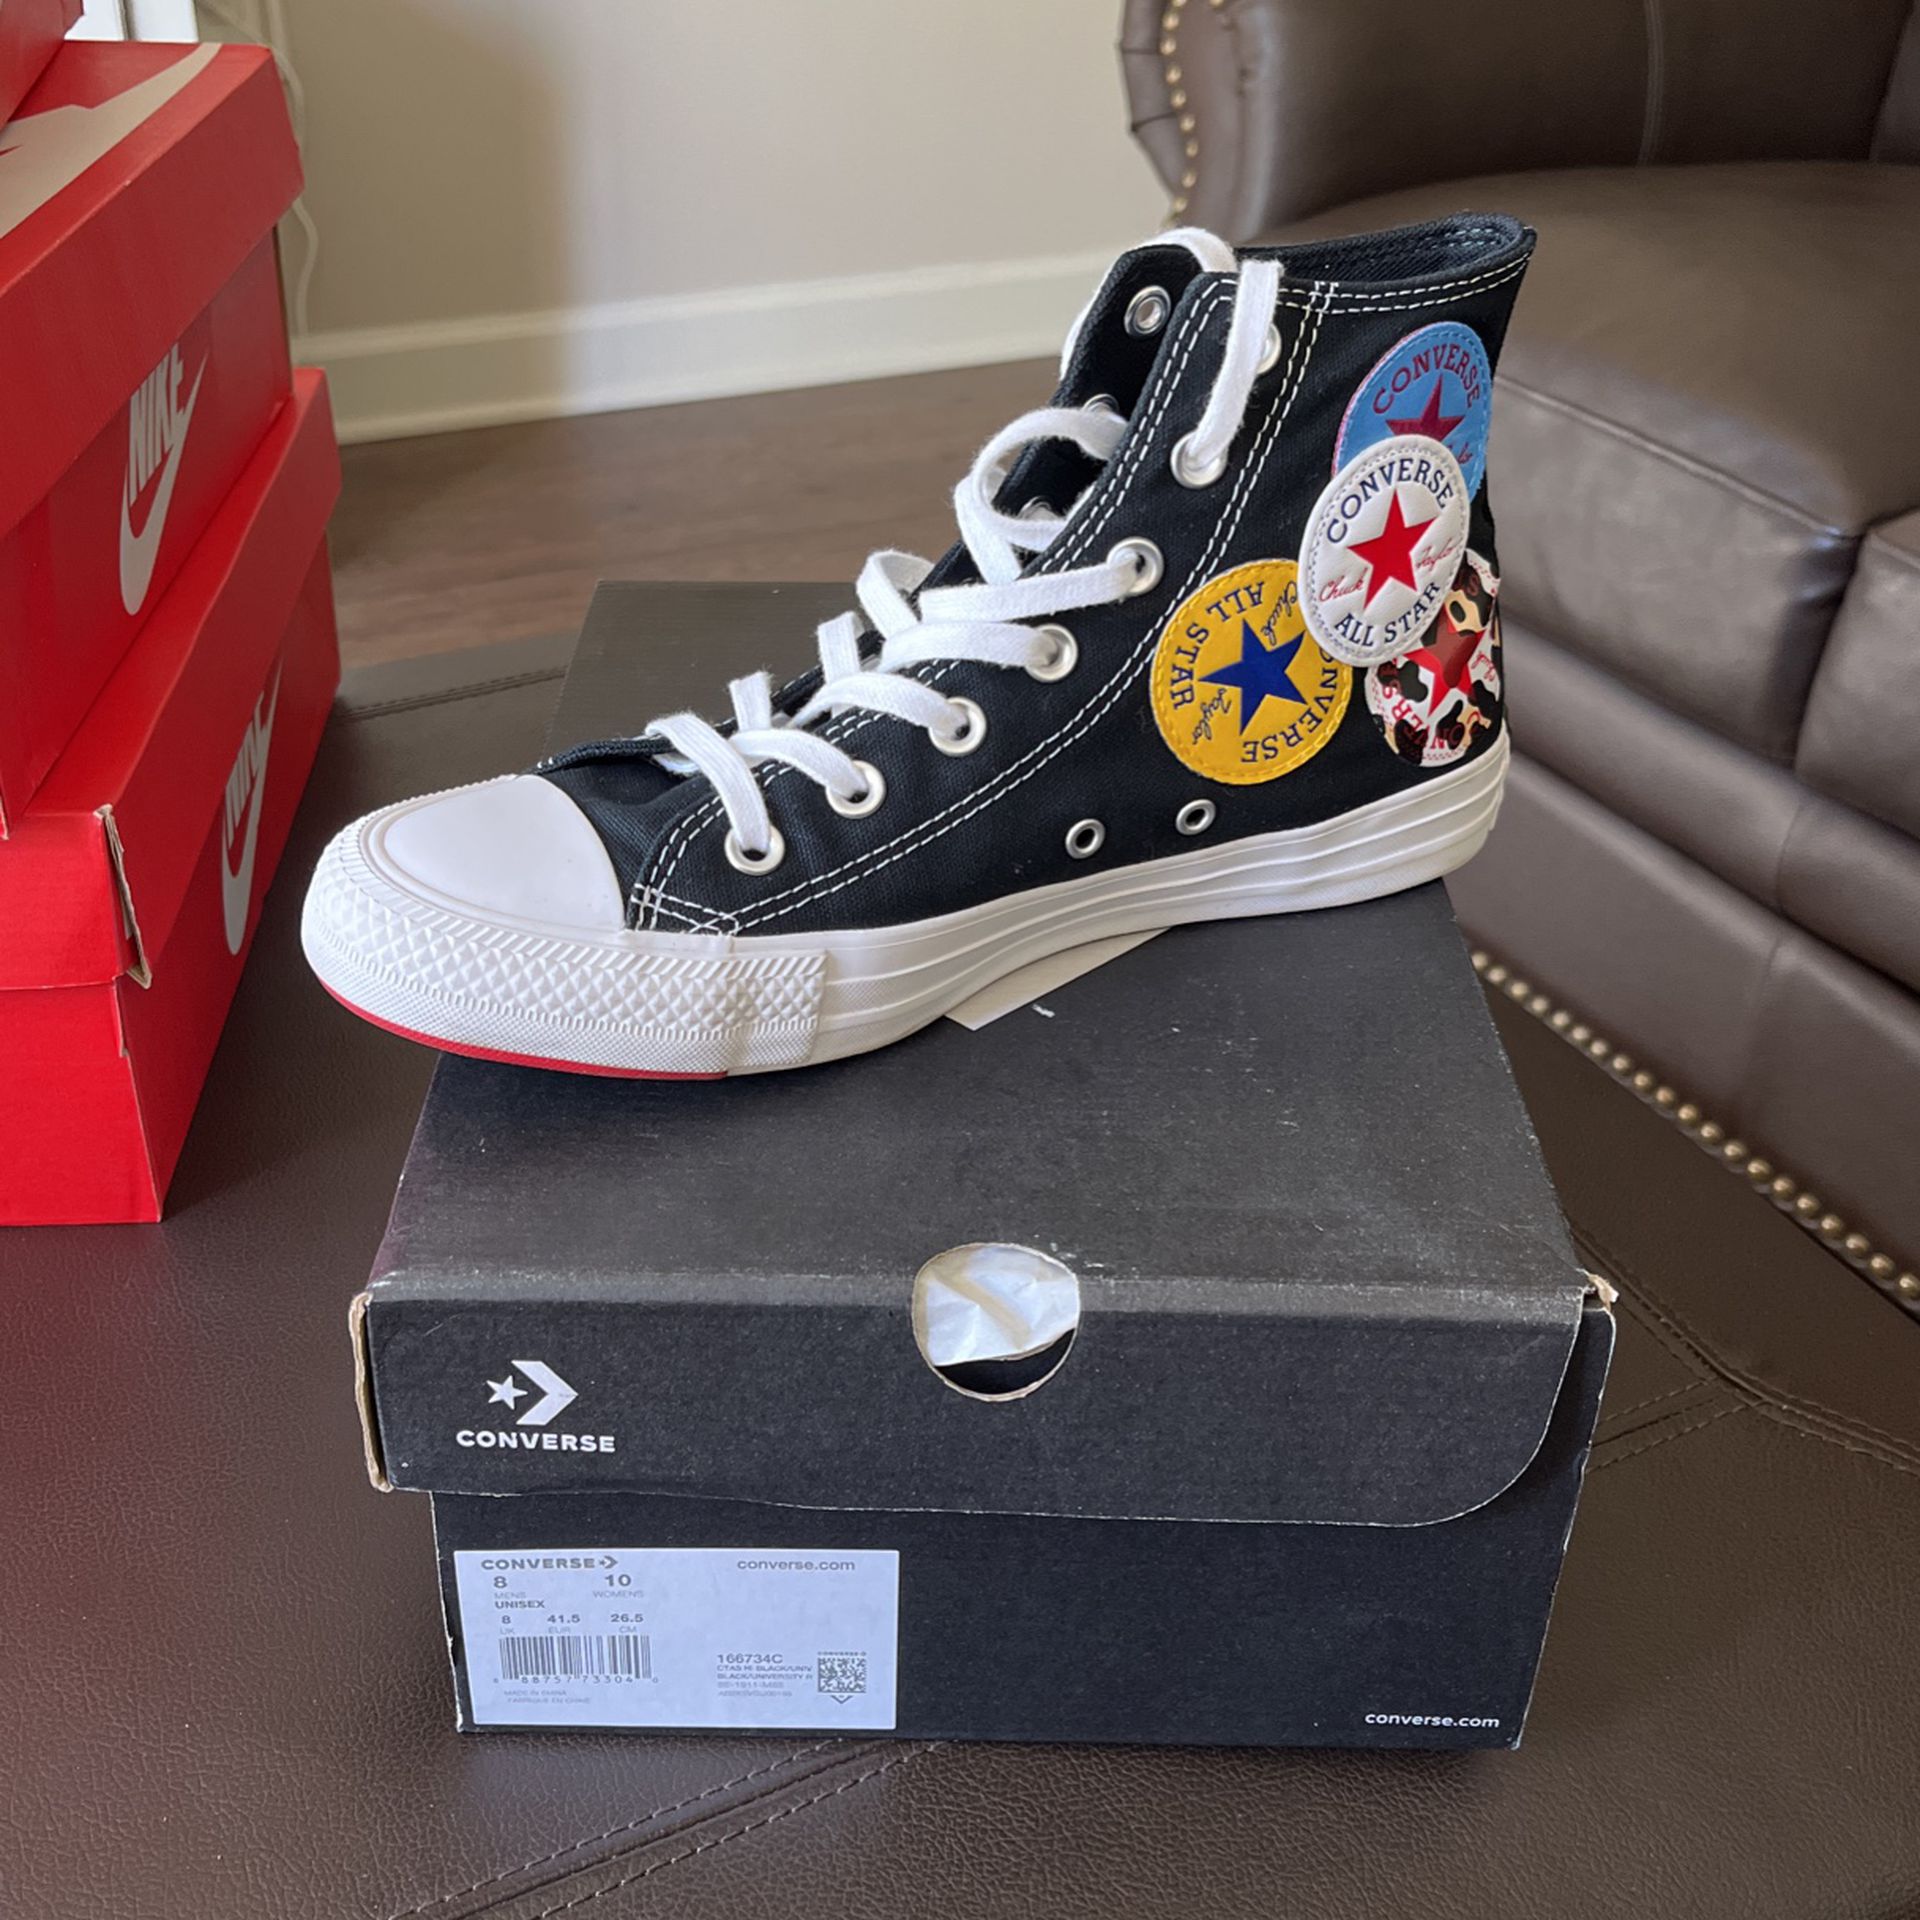 Converse Special Edition Men's Size 6.5 Women's Size 8 for Sale in White Oak,